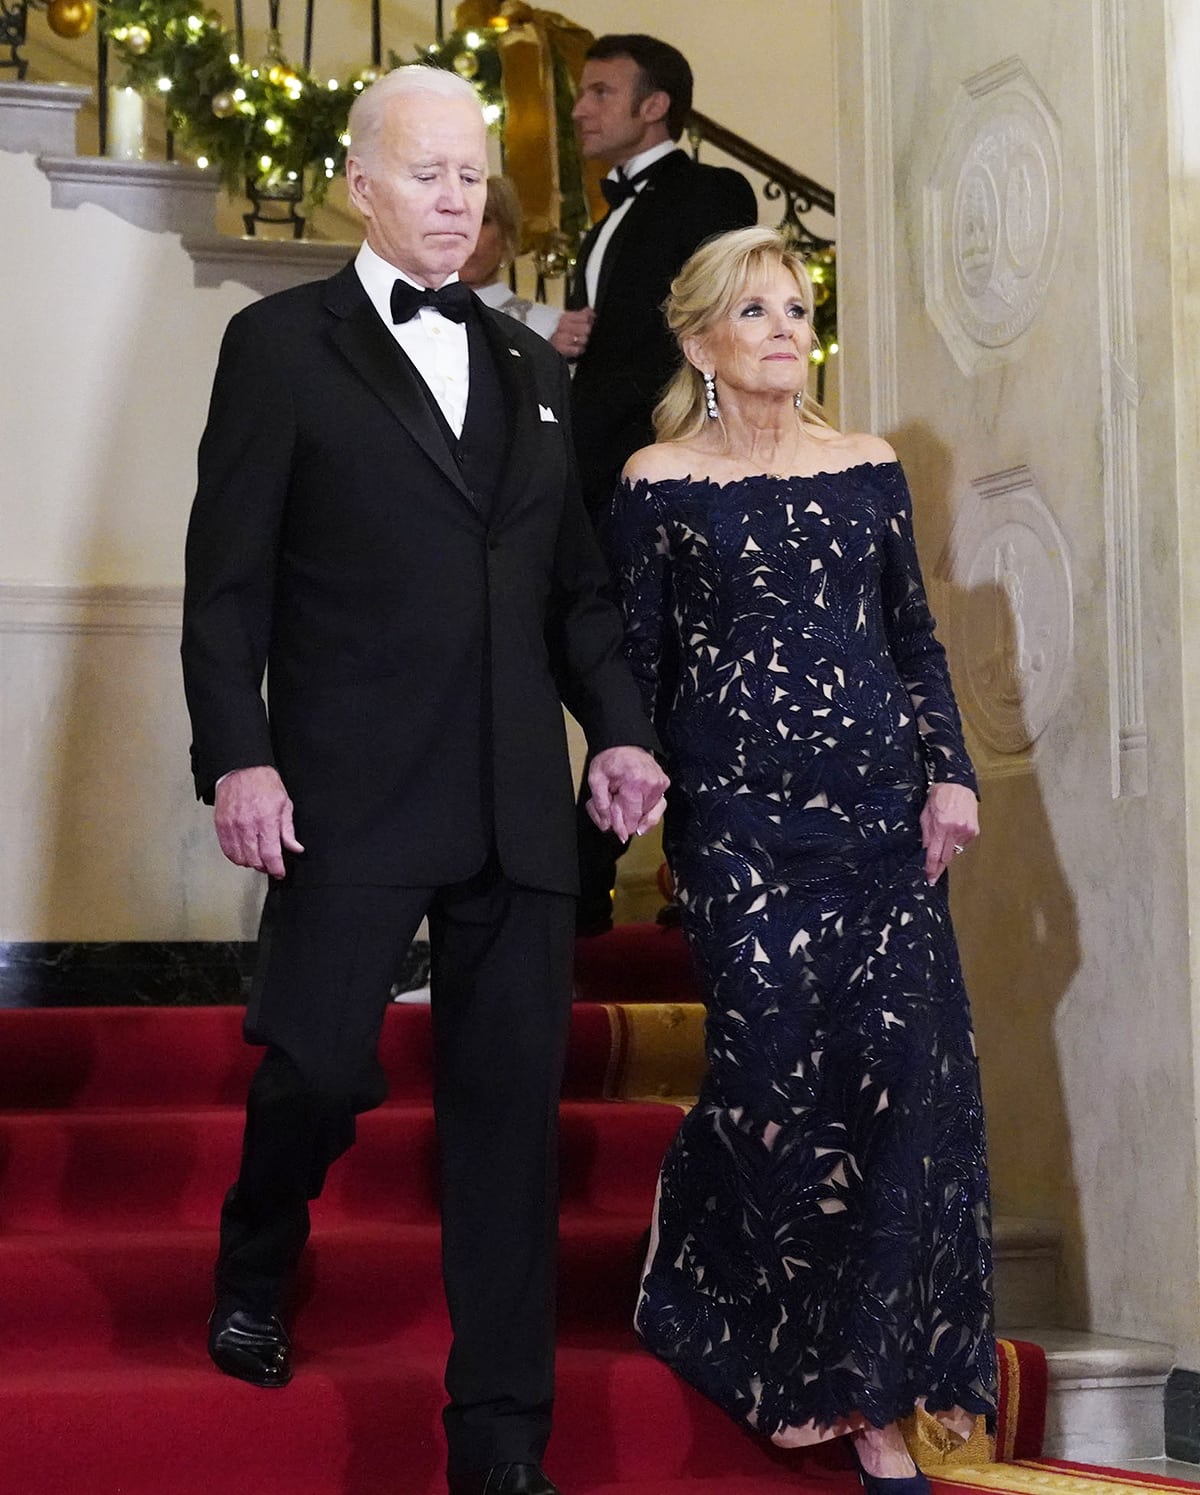 First Lady Dr. Jill Biden wearing a custom hand-beaded Oscar de la Renta gown for the first White House State Dinner of the Biden administration on December 2, 2022